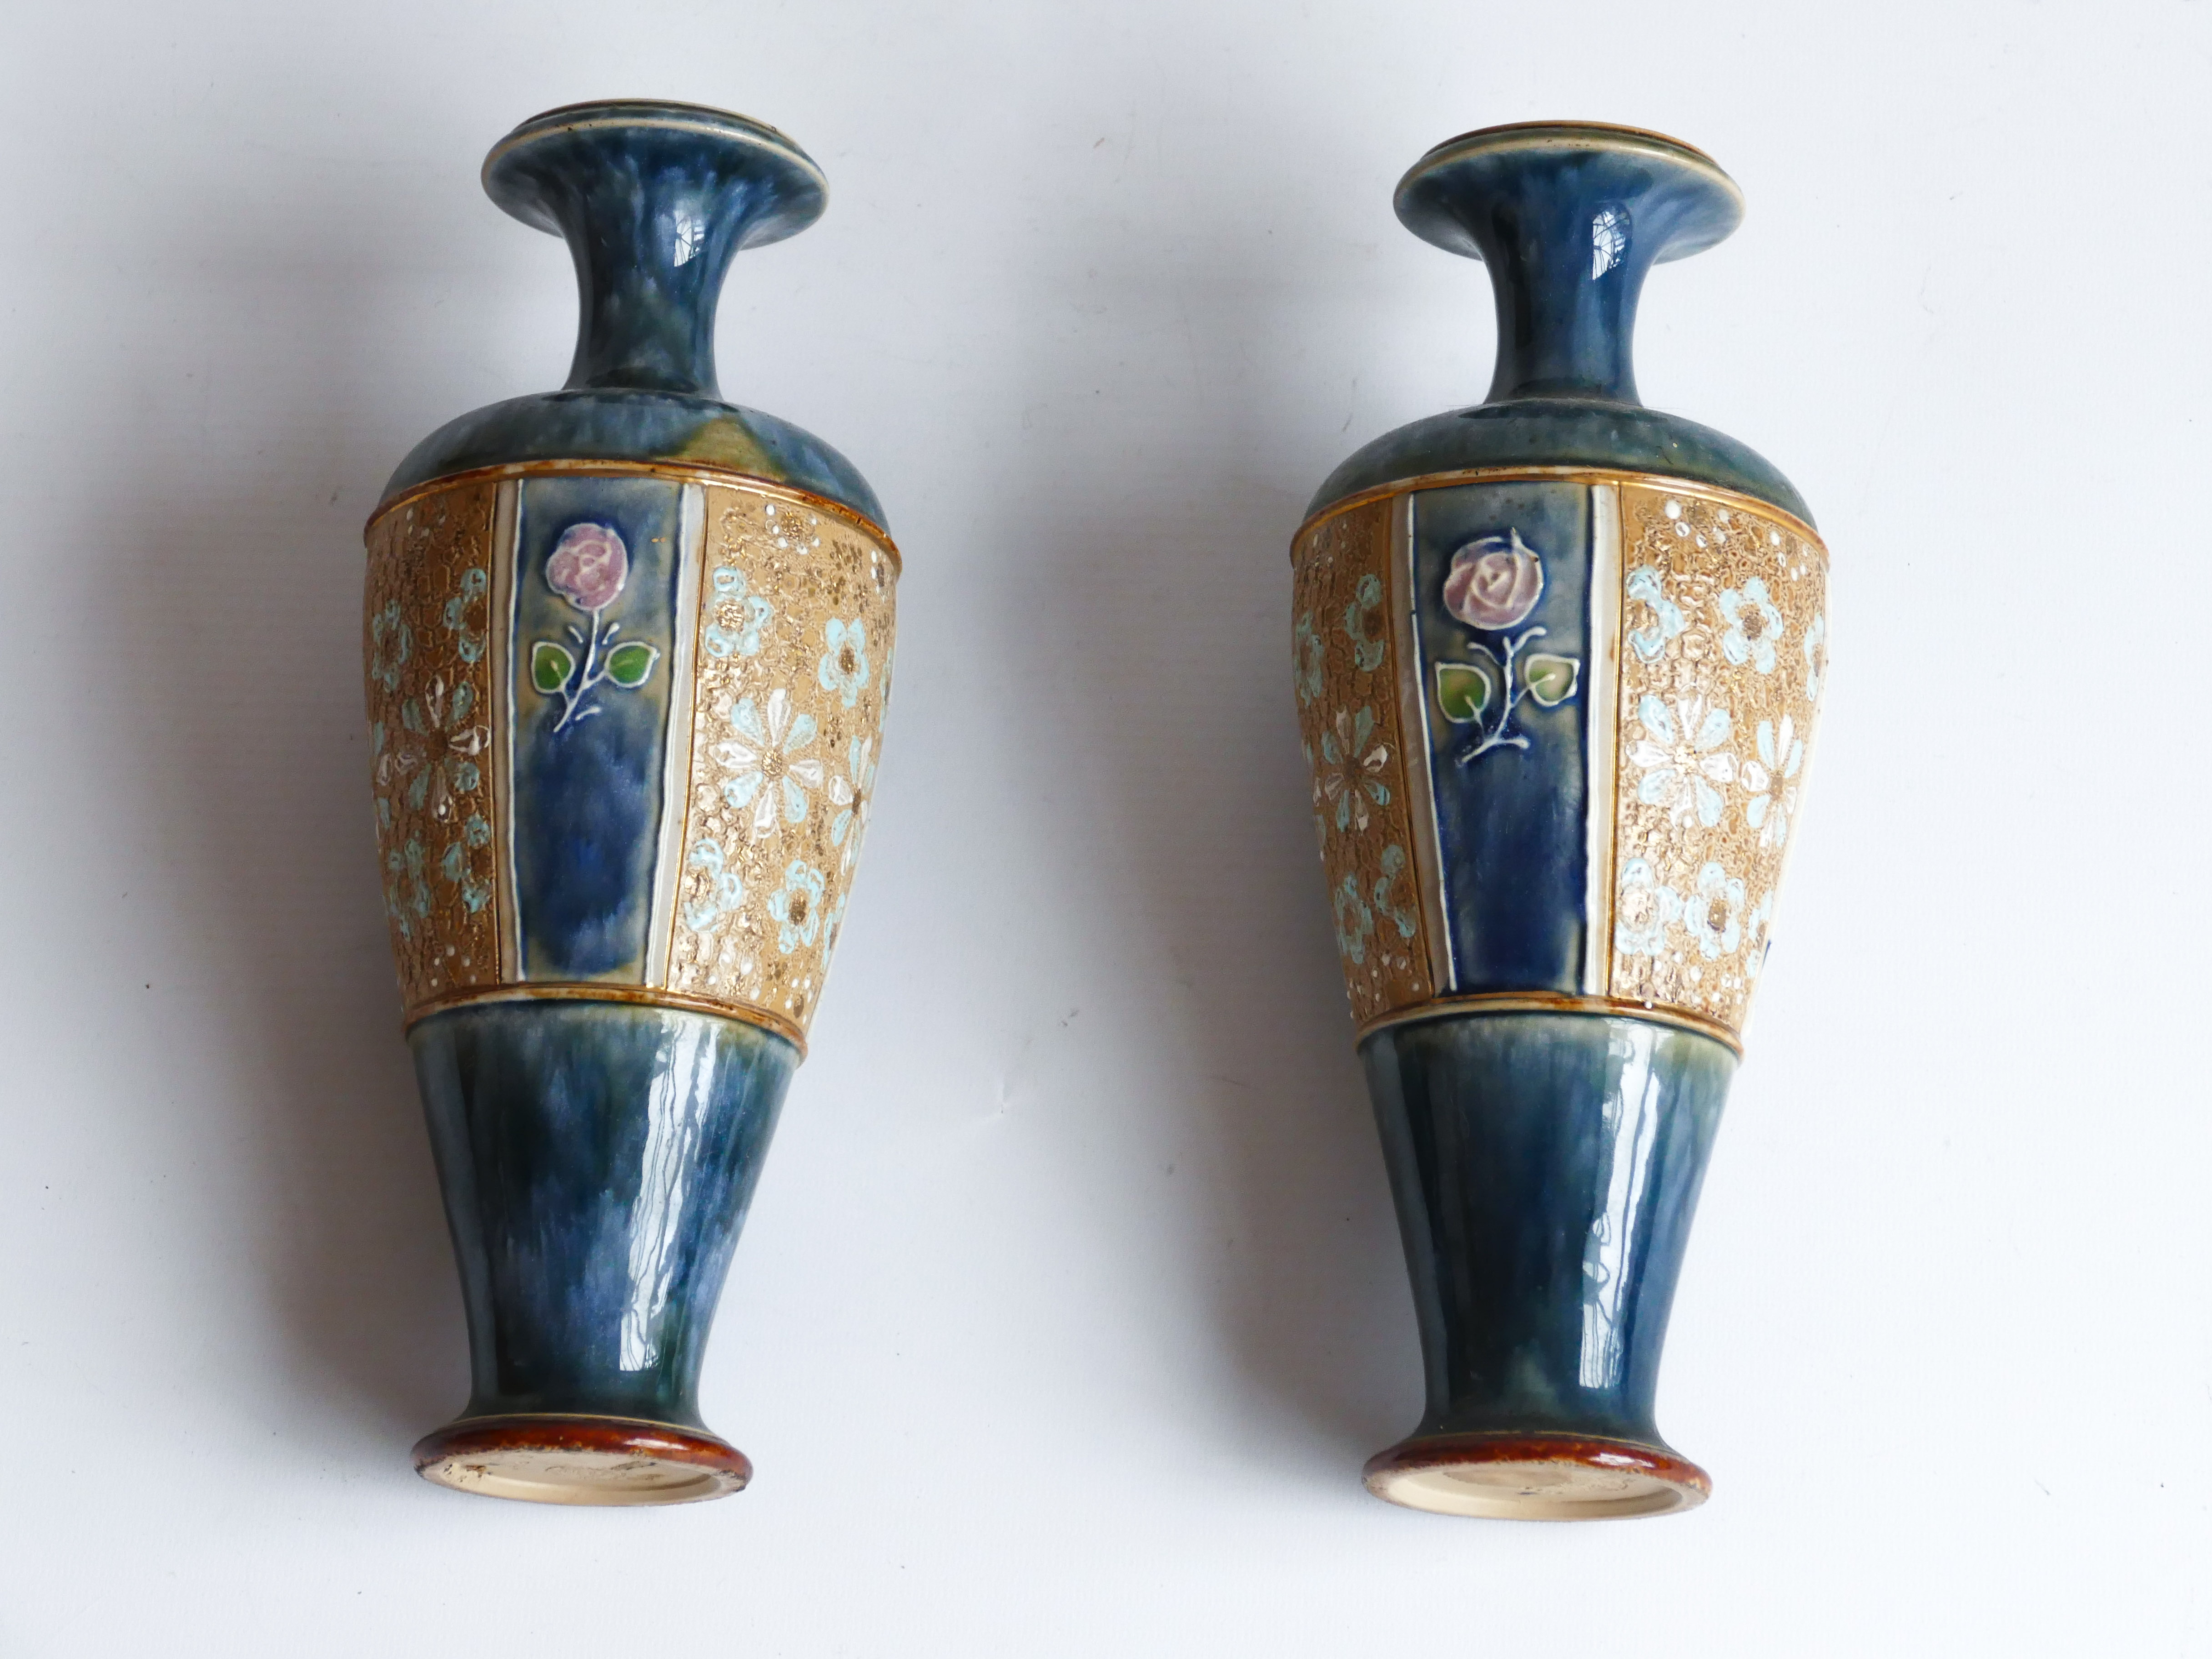 ROYAL DOULTON PAIR OF GLAZED ANTIQUE TAPESTRY VASES CHINA FLORAL MADE IN ENGLAND ART NOUVEAU LAMBETH